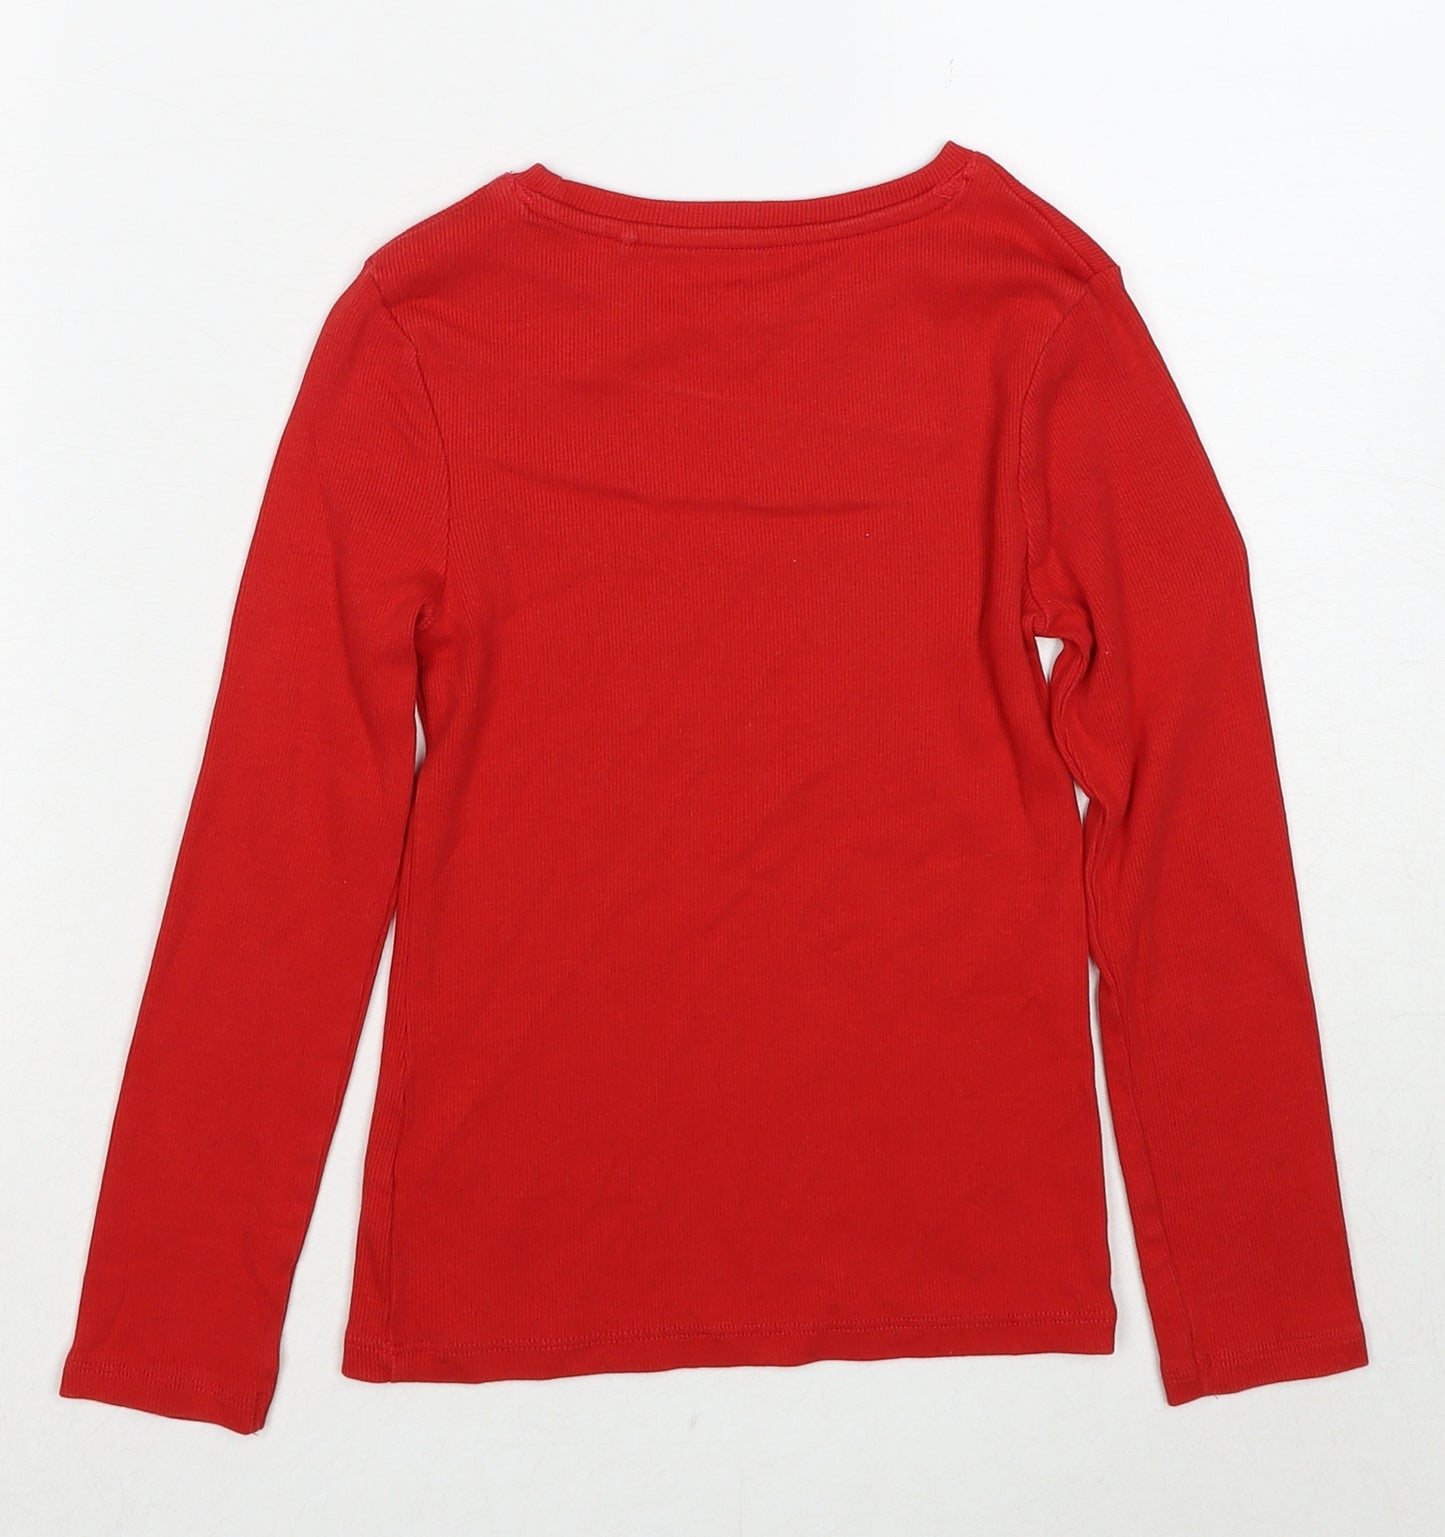 NEXT Girls Red Cotton Basic T-Shirt Size 7 Years Round Neck Pullover